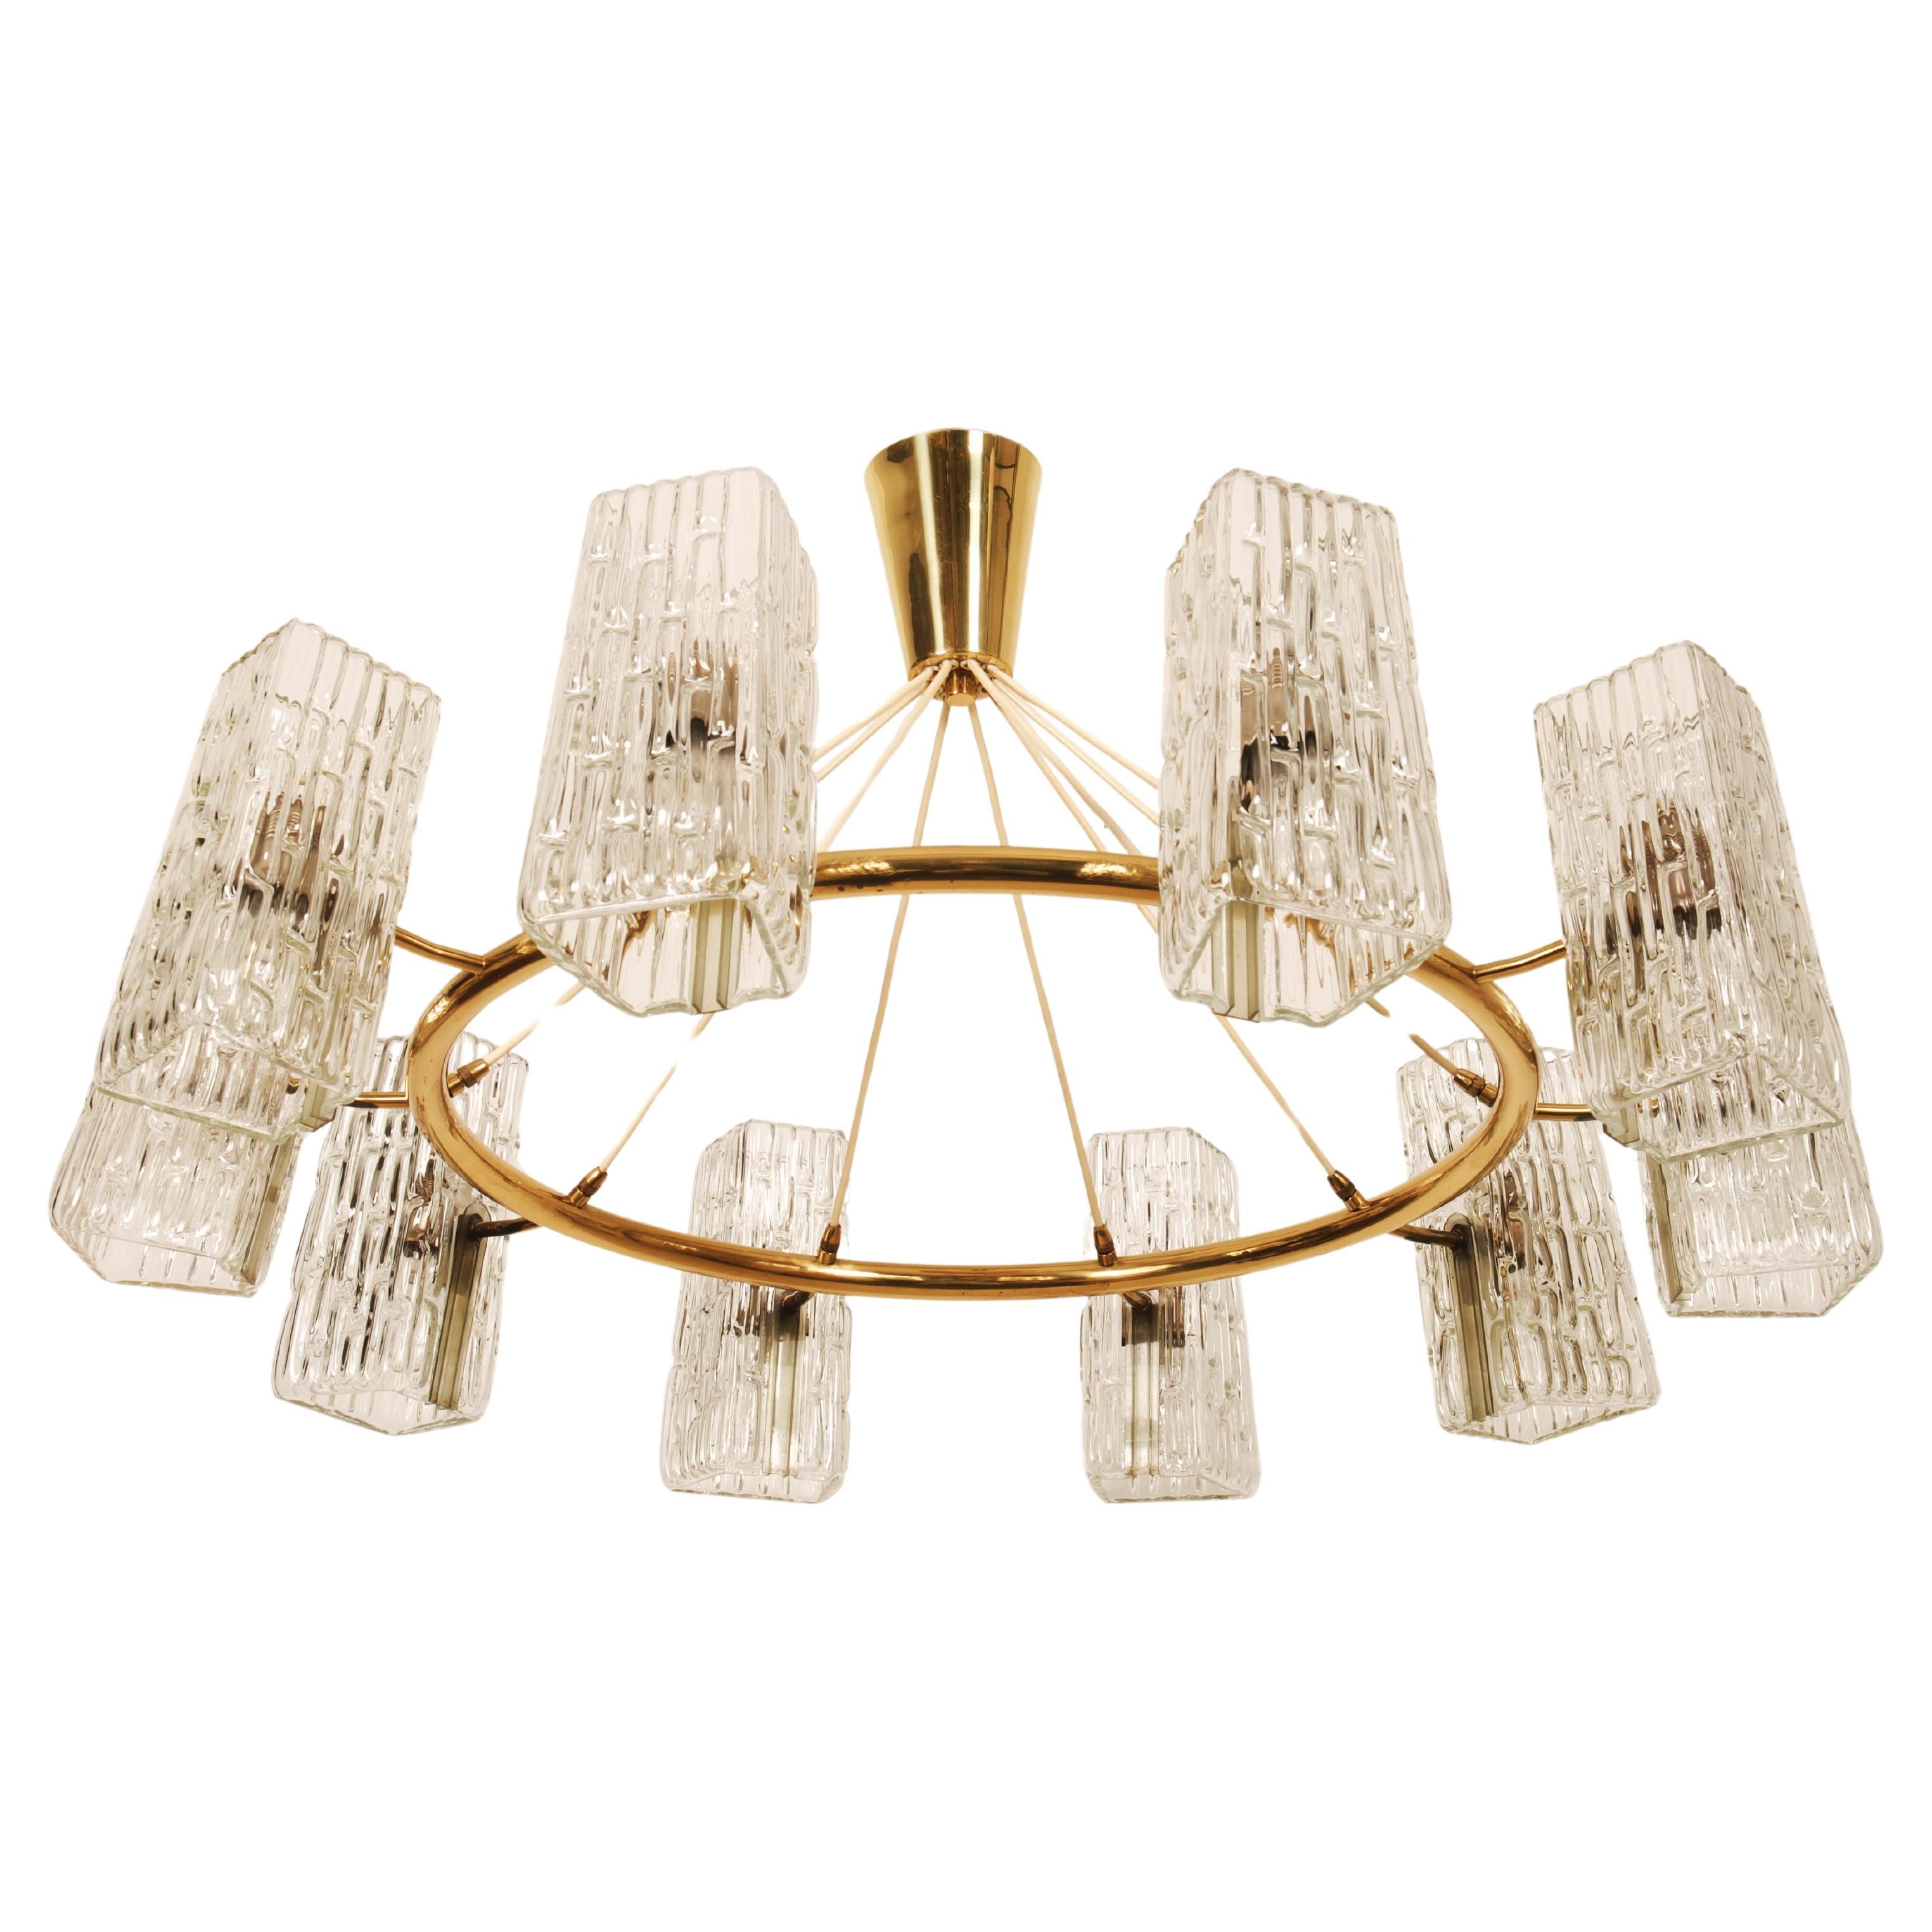 Huge Midcentury Brass Chandelier With Pressed Glass Shades By Rupert Nikoll